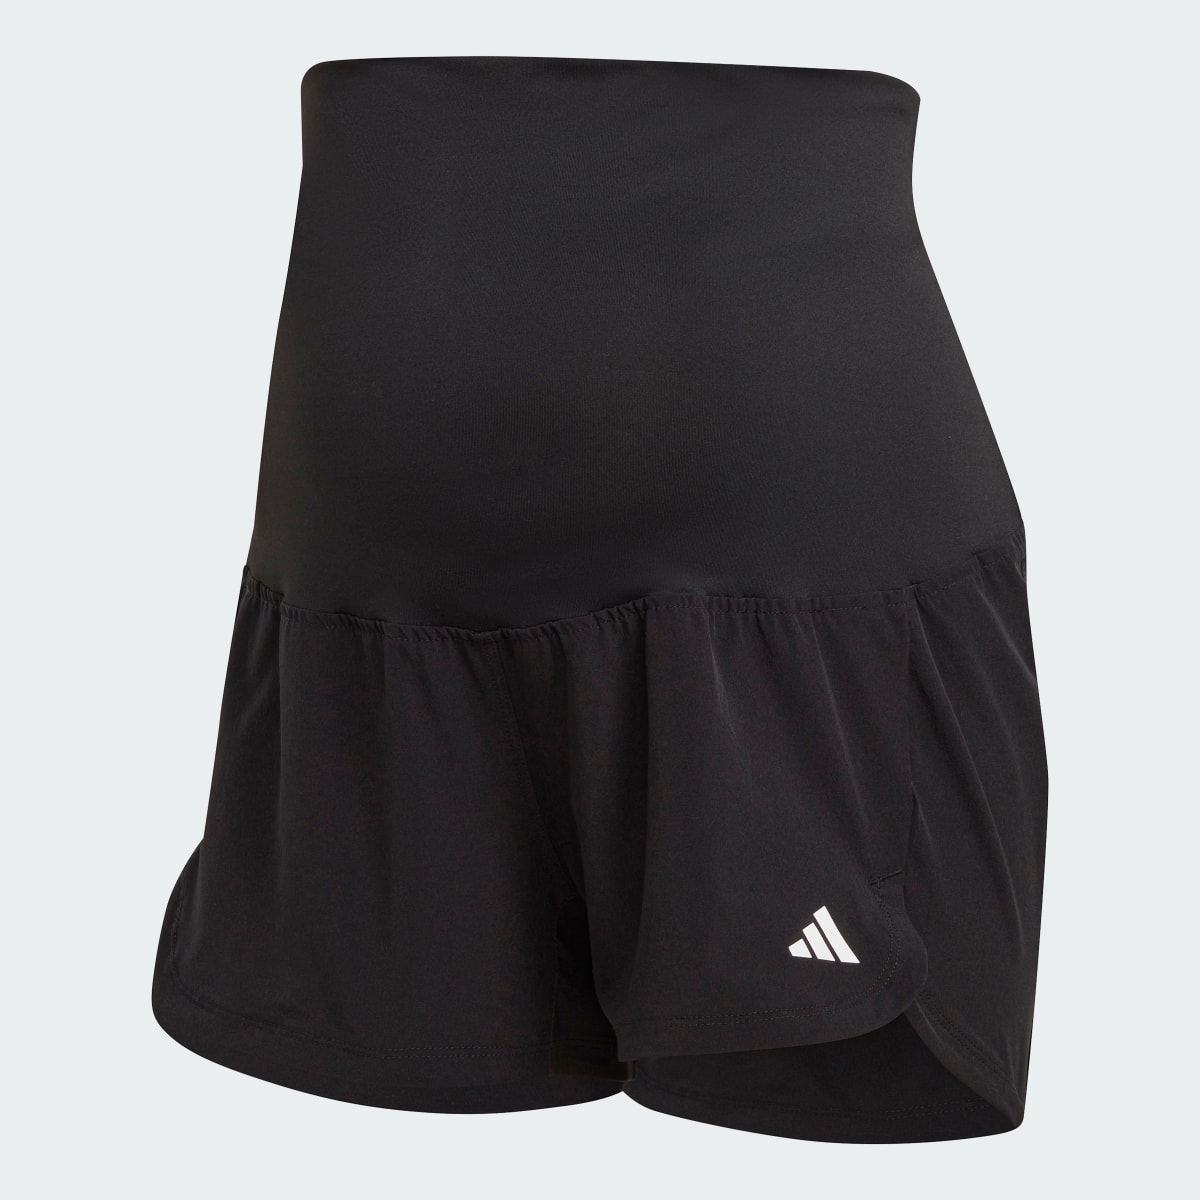 Adidas Pacer Woven Stretch Training Maternity Shorts. 5